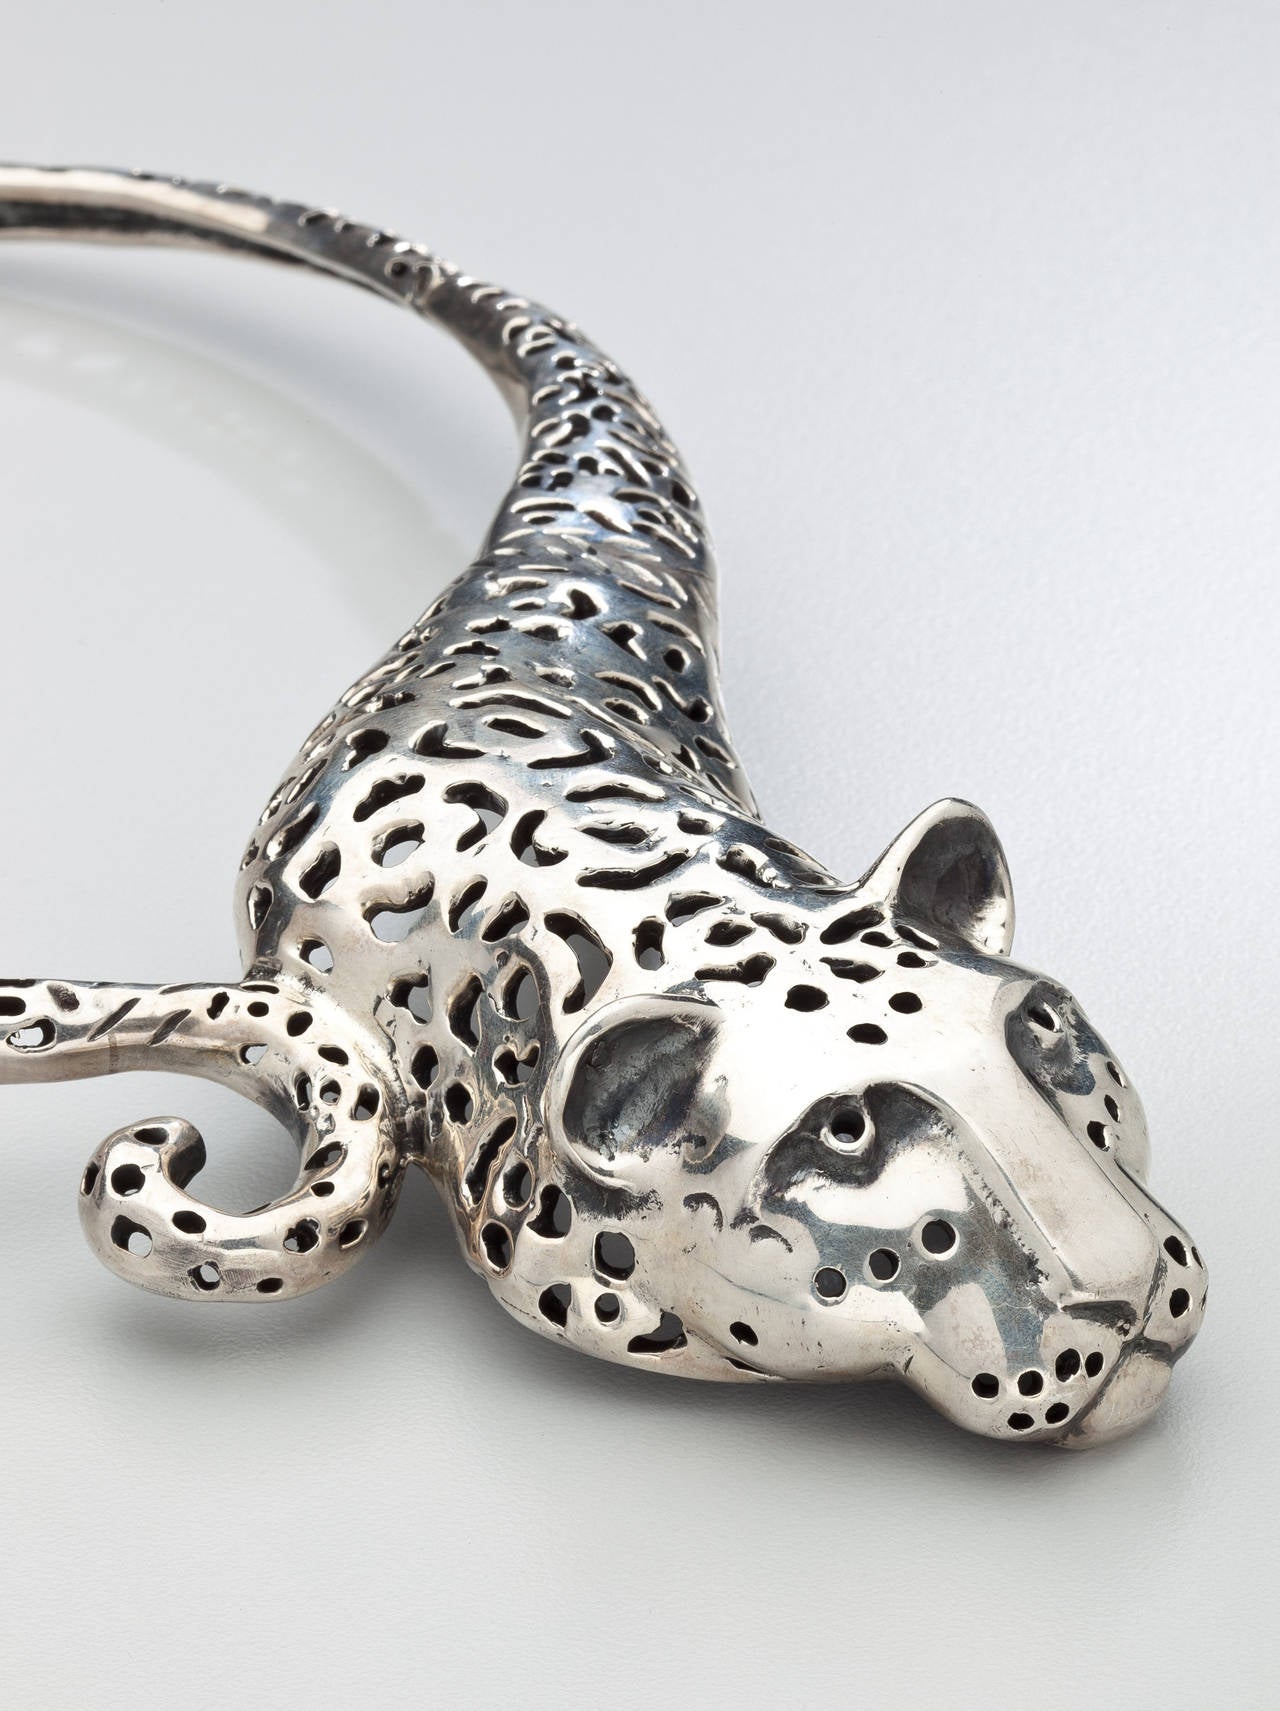 A sterling silver necklace designed as a jaguar by Emilia Castillo, the daughter of one of the original Los Castillo brothers who worked in Taxco. Mexico.  The necklace, which is constructed in silver segments, is pierced to simulate the pattern of